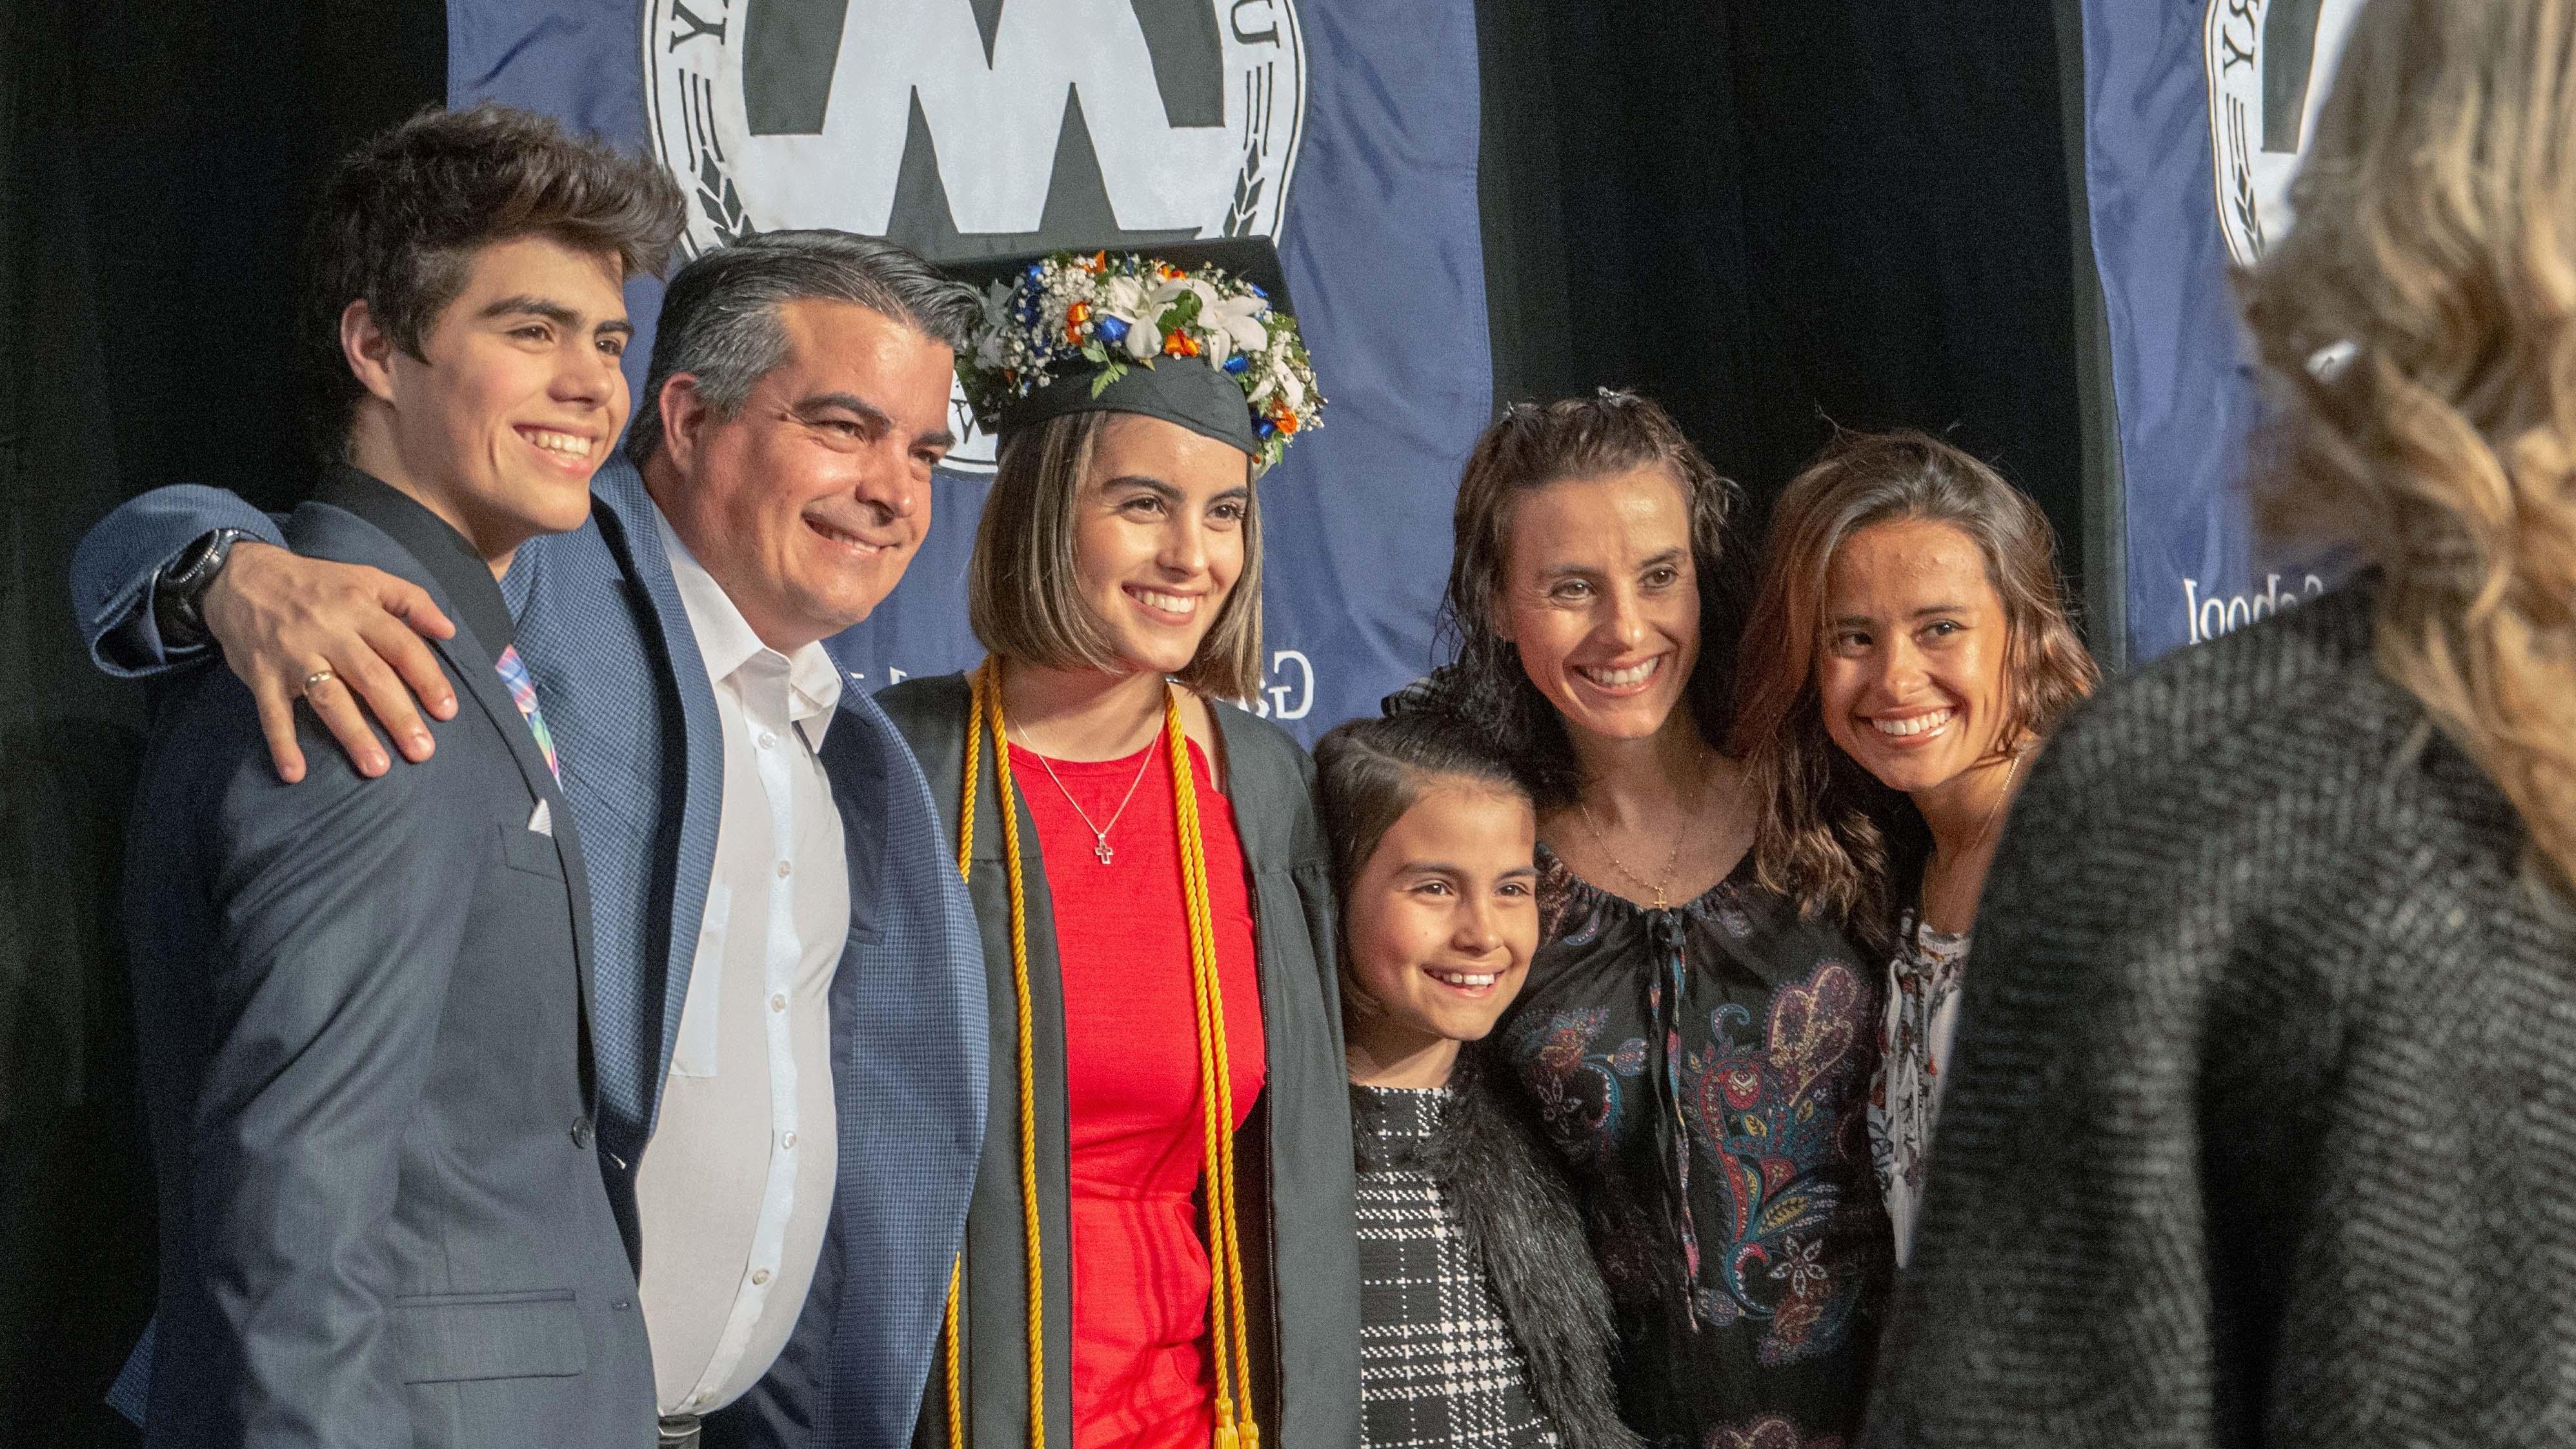 Graduate gathered with family for a photo at commencement